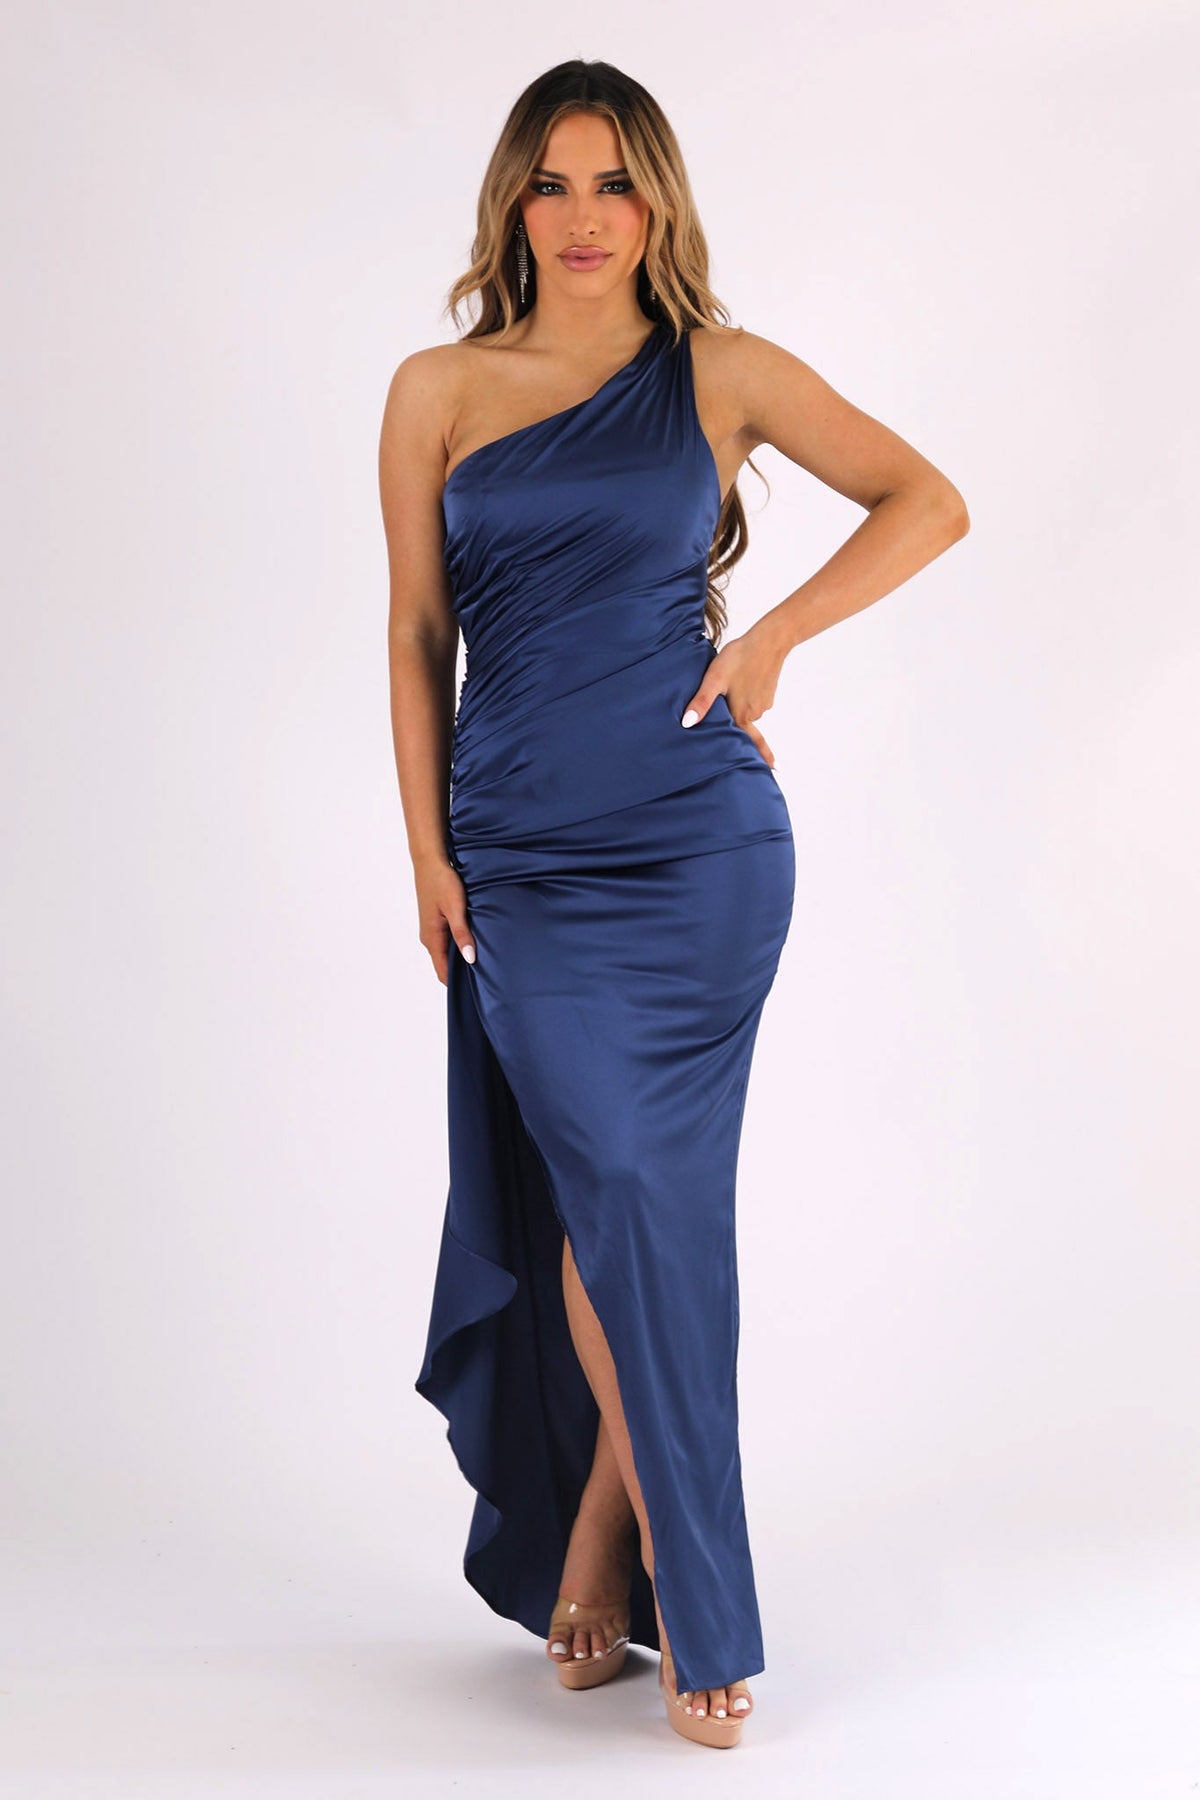 Form Fitting Satin Maxi Dress with One Shoulder Neckline, Gathering Detail at Waist and Frill Hemline in Navy Blue Color